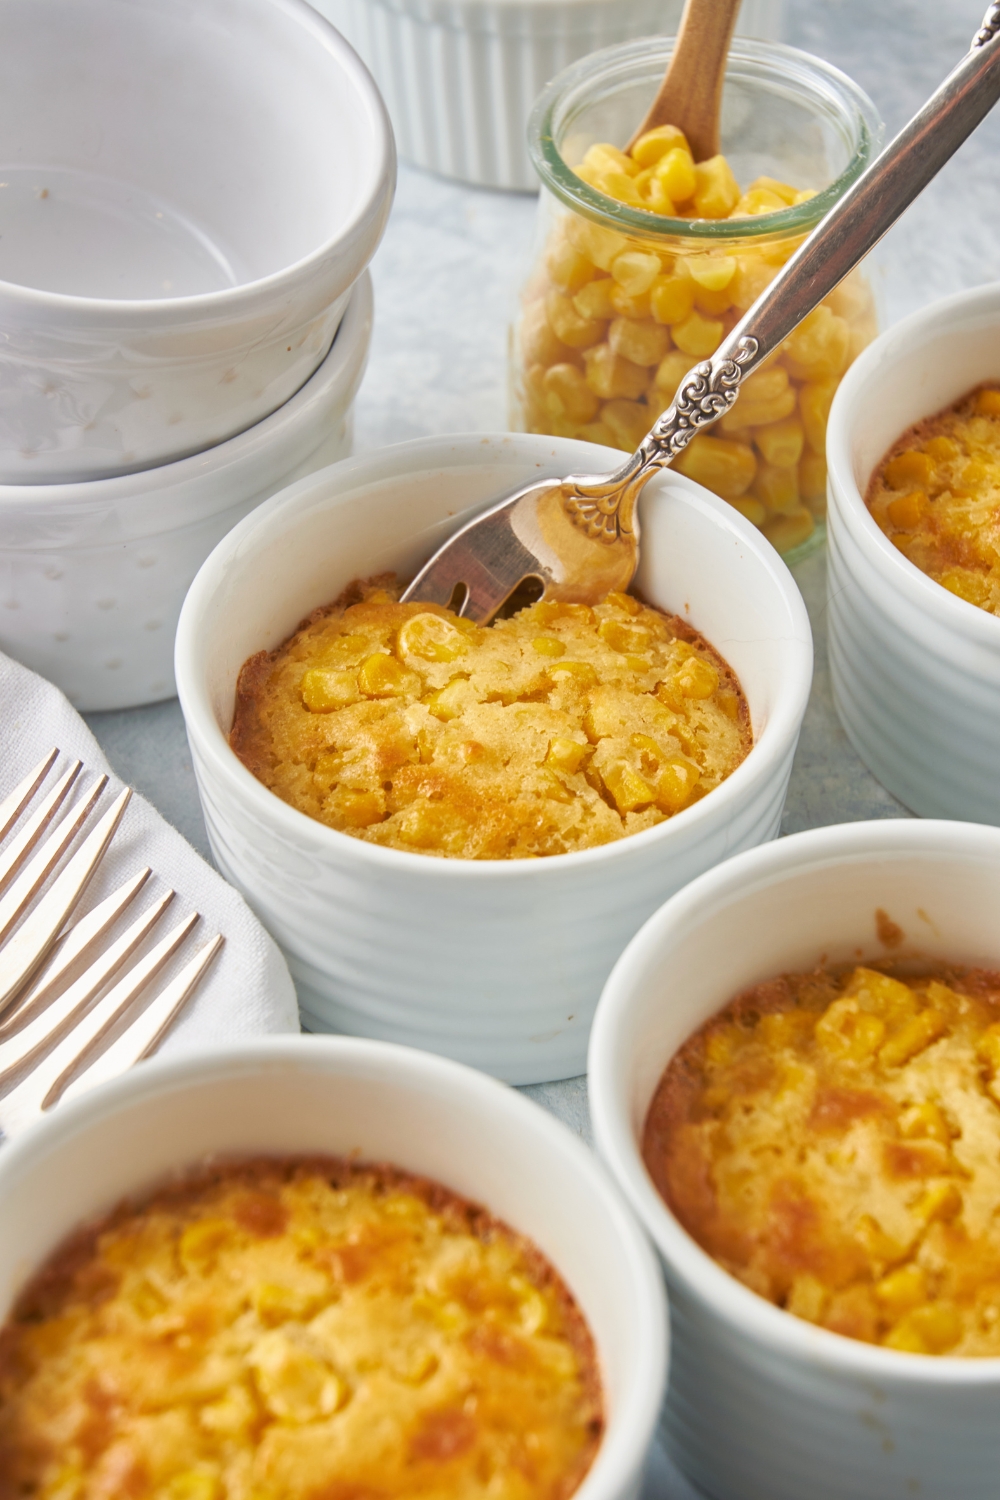 White ramekins filled with golden brown corn casserole. There is a fork in one of the ramekins and a jar of corn is next to it.